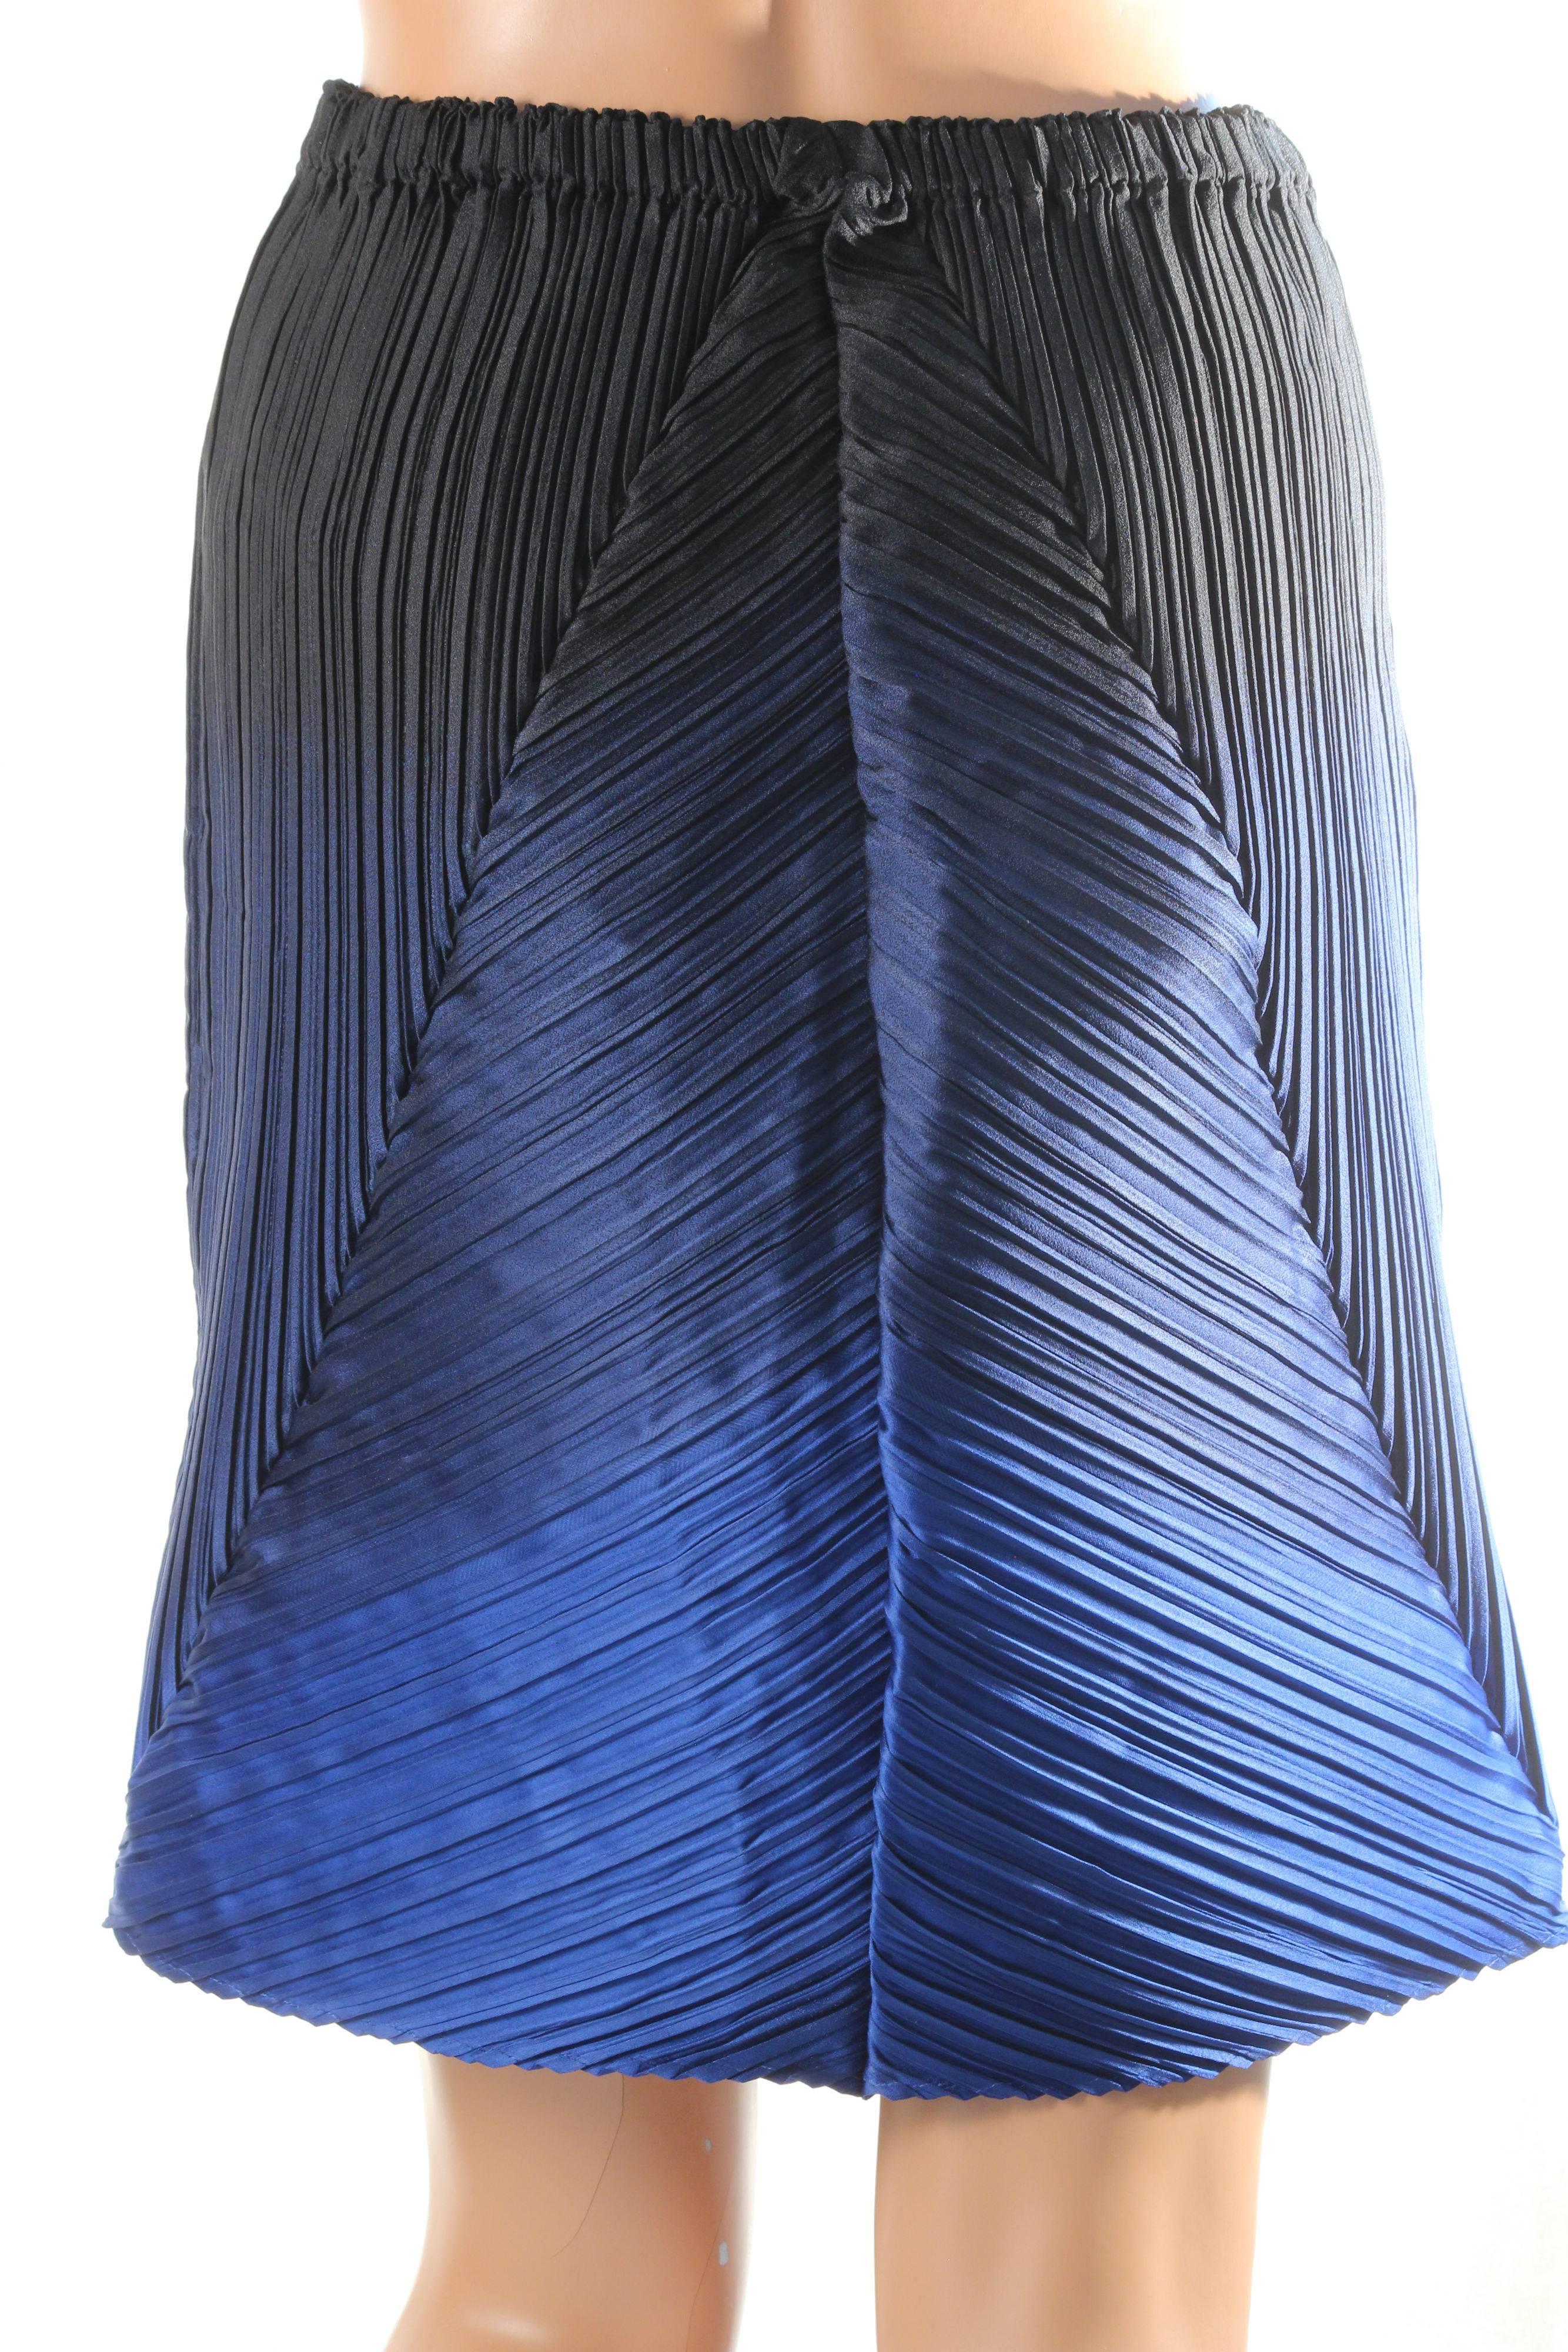 Issey Miyake Blue Ombre Micro Pleated Jacket and Skirt Suit Ensemble Japan Sz 2  1